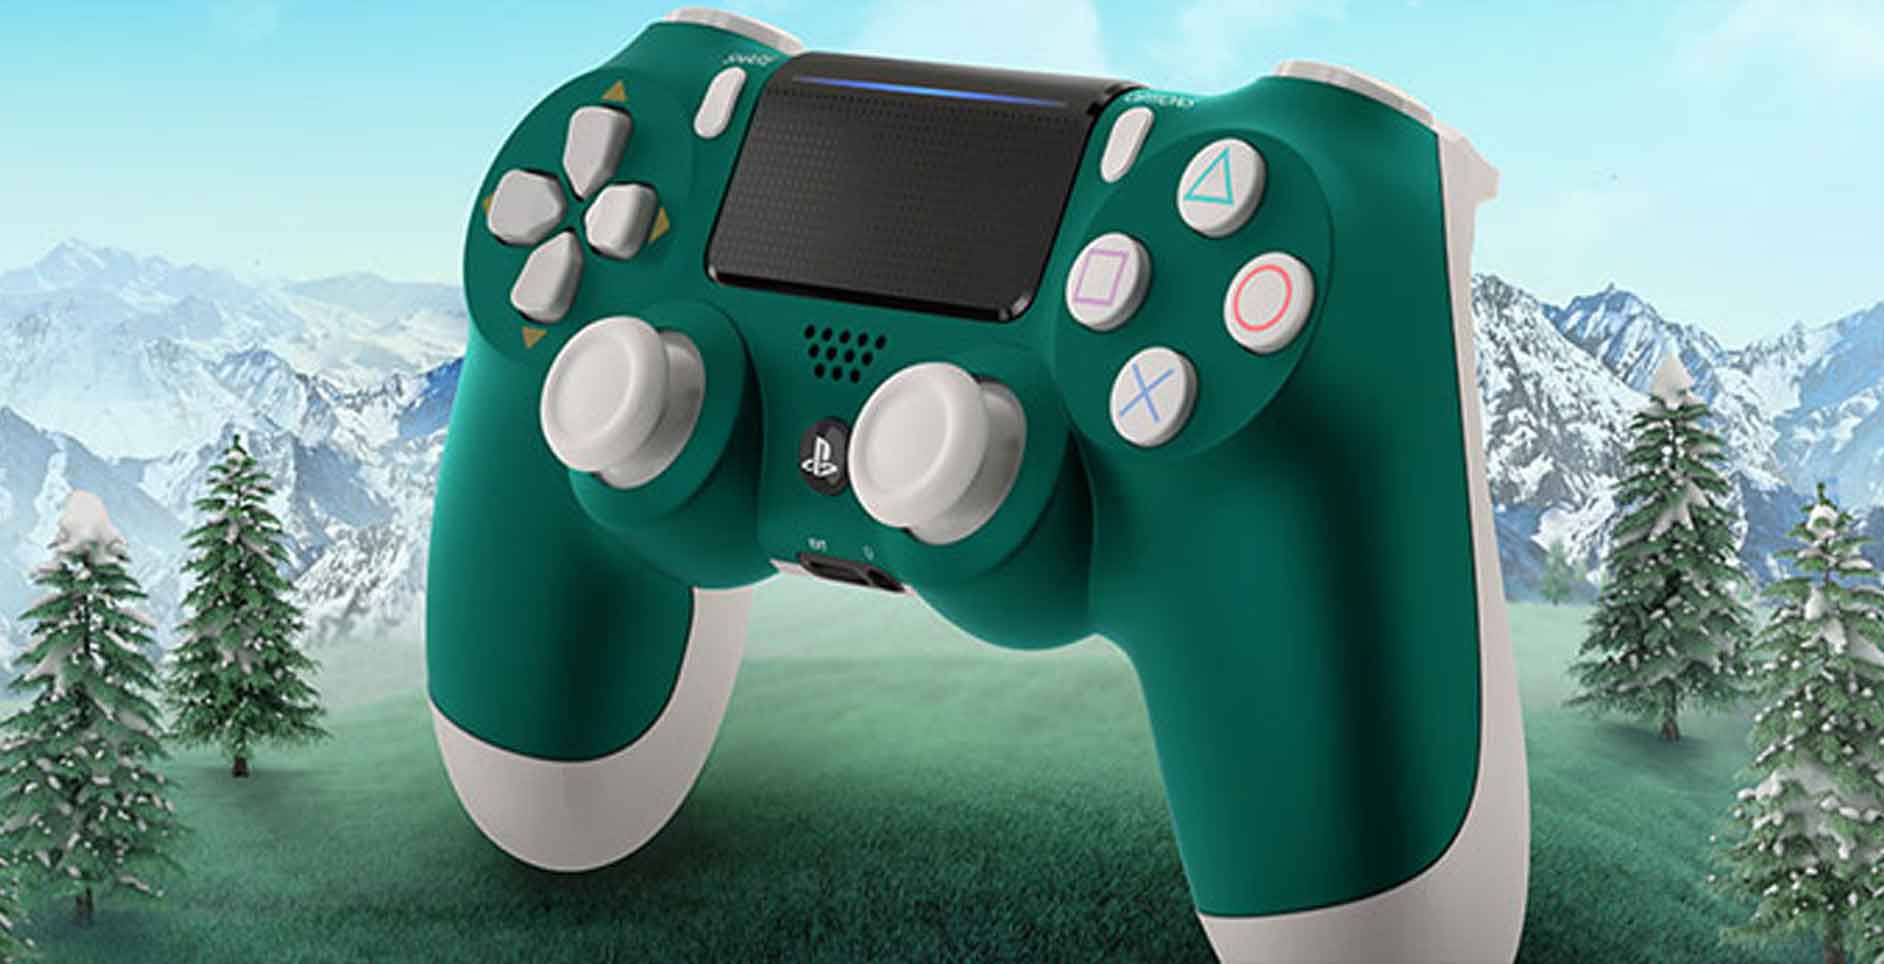 ps4 controller green and white